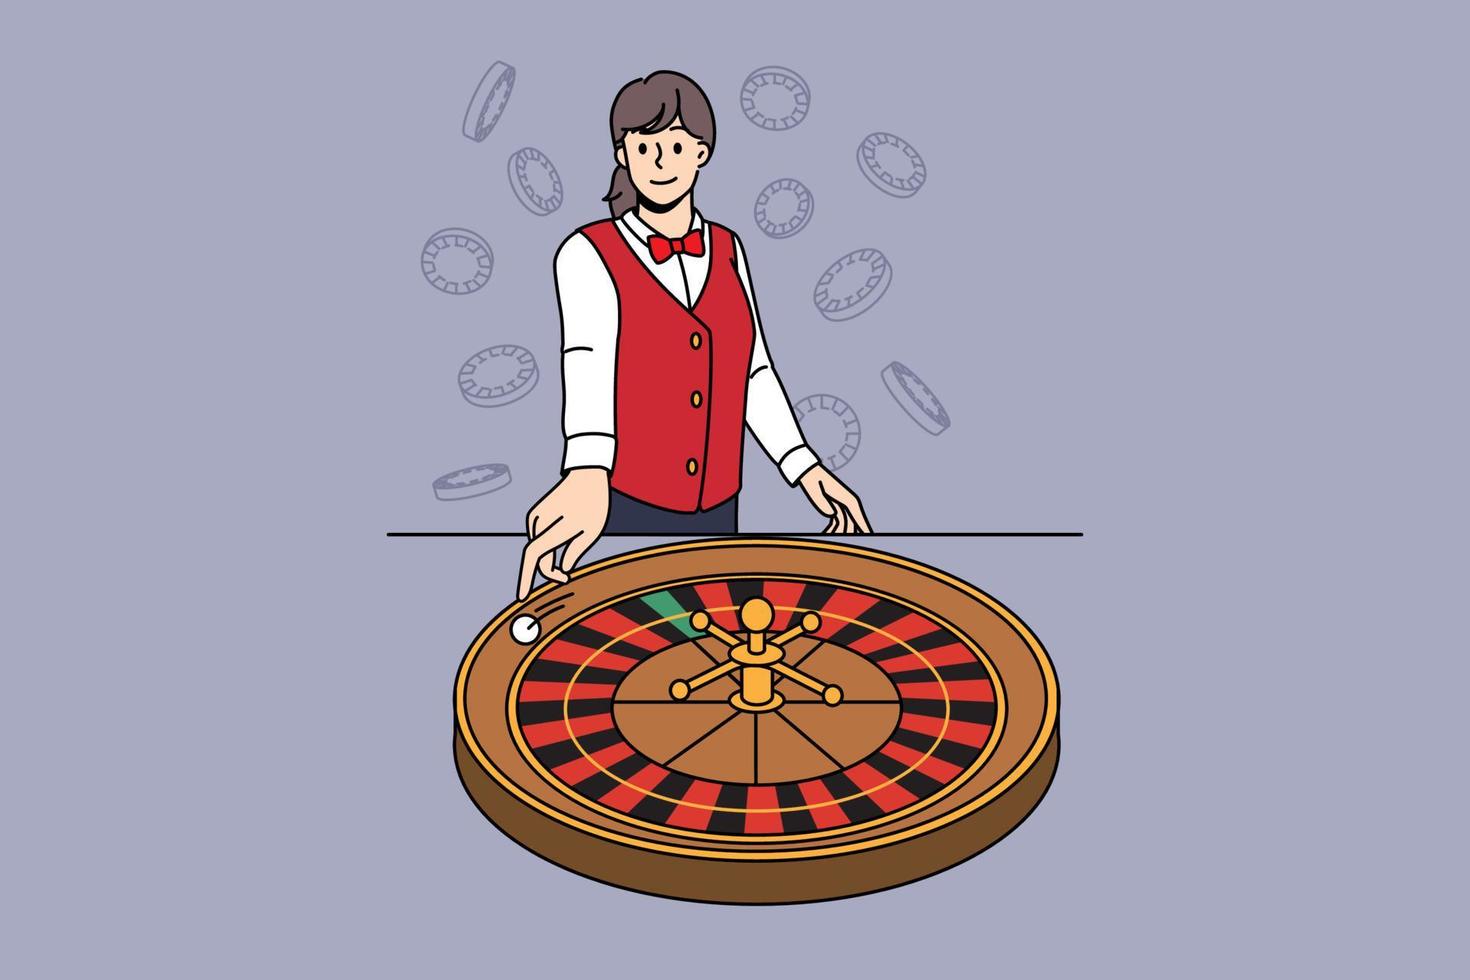 Smiling female croupier spin roulette work in casino. Happy woman stick whirl wheel in gaming house. Gambling and risky games. Entertainment and amusement. Vector illustration.